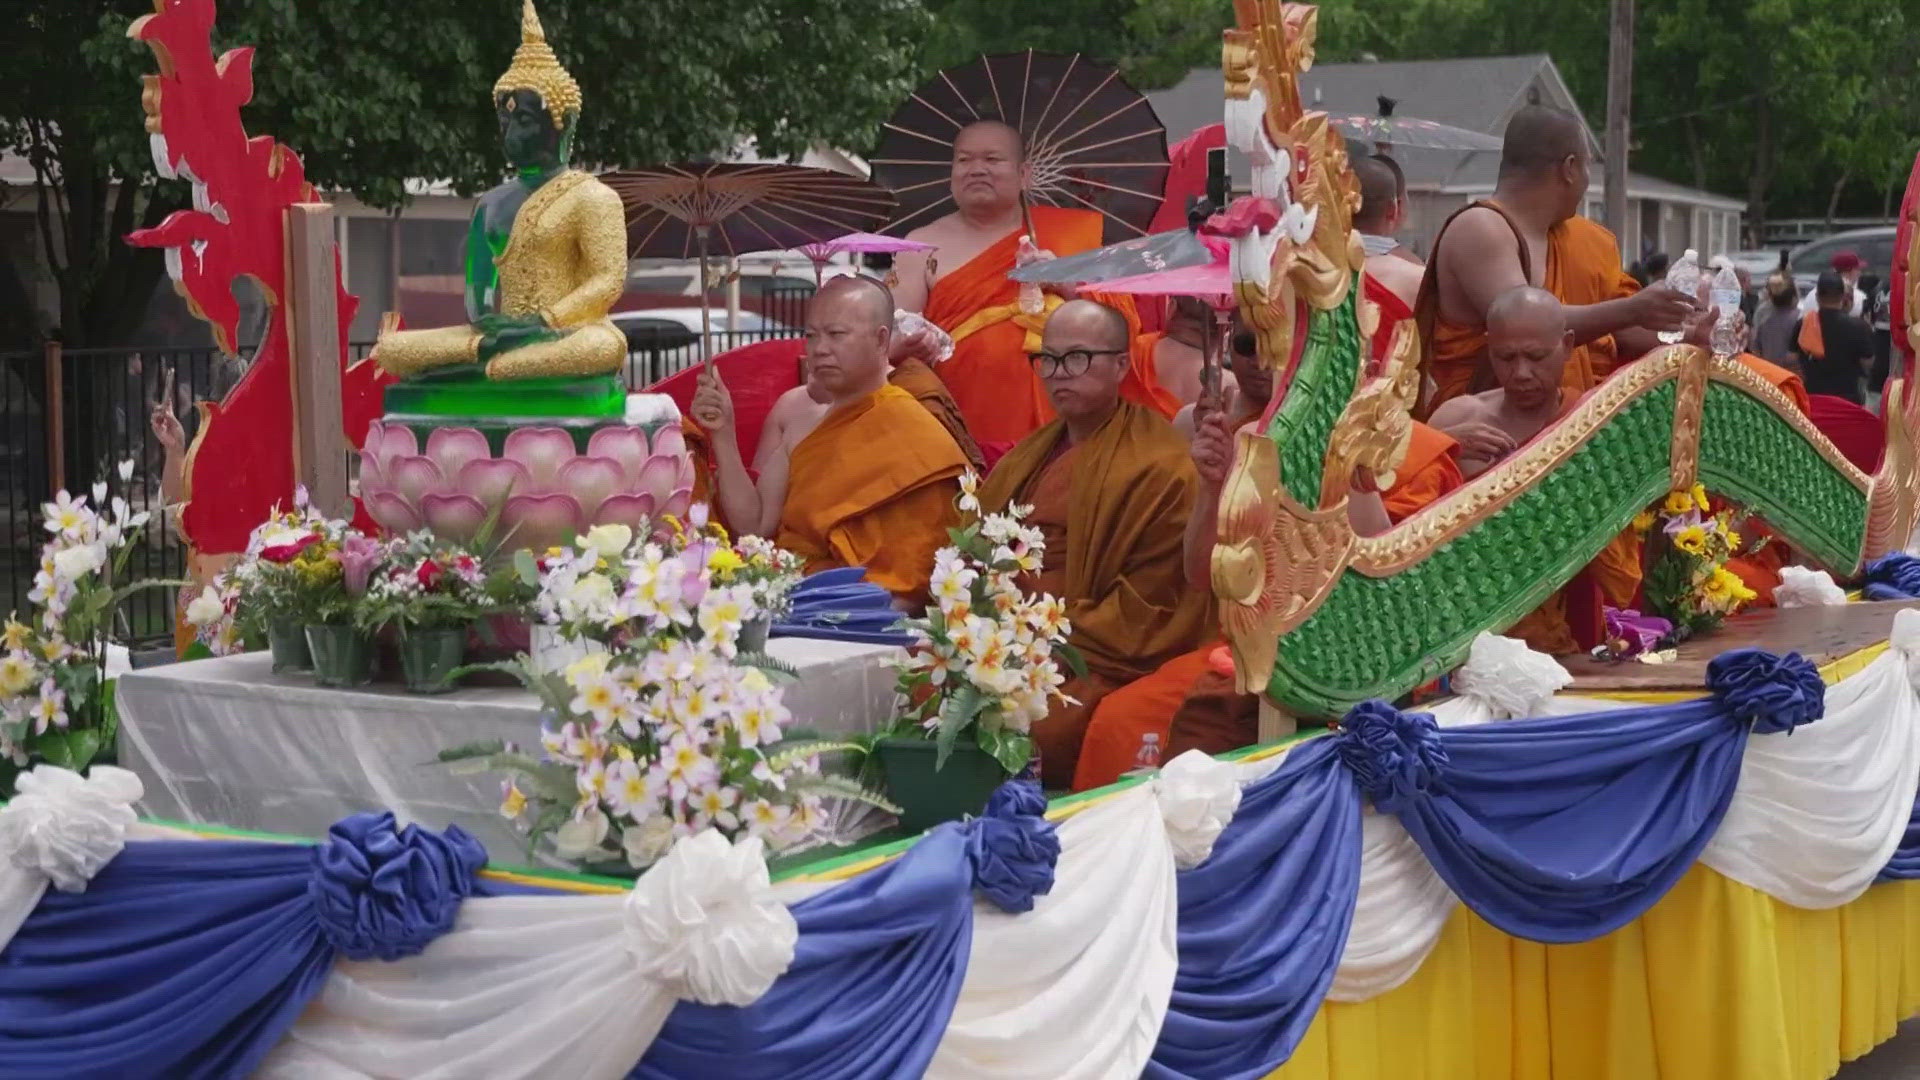 Every year in April, the Buddhist temple in Fort Worth is filled with people inside and out.